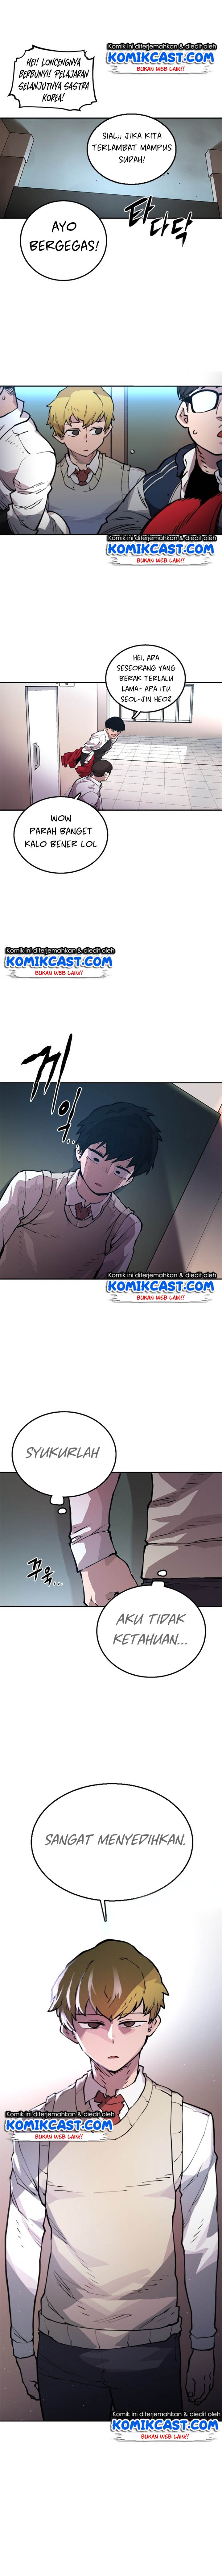 Player Chapter 01 16